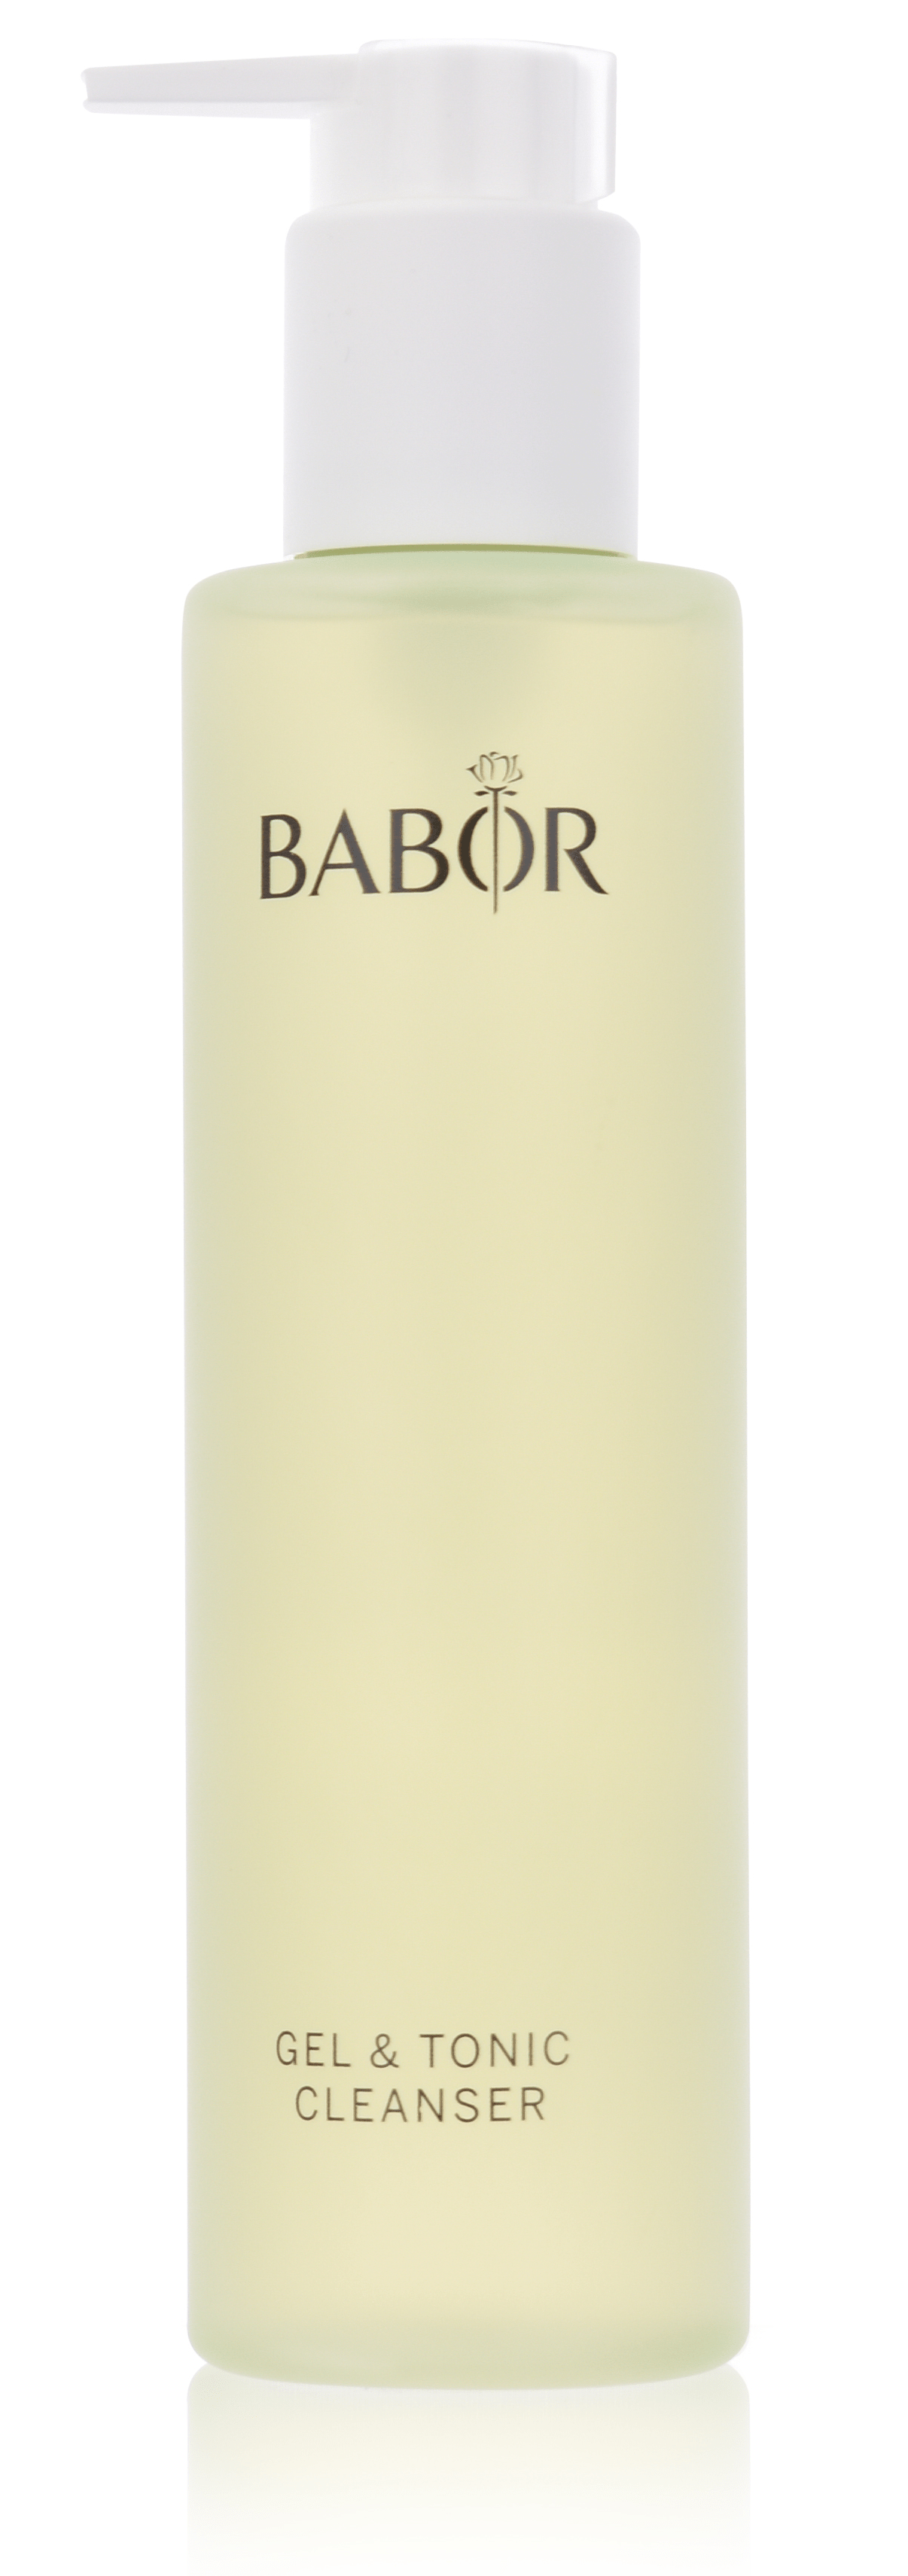 BABOR Cleansing - Gel & Tonic Cleanser 200 ml